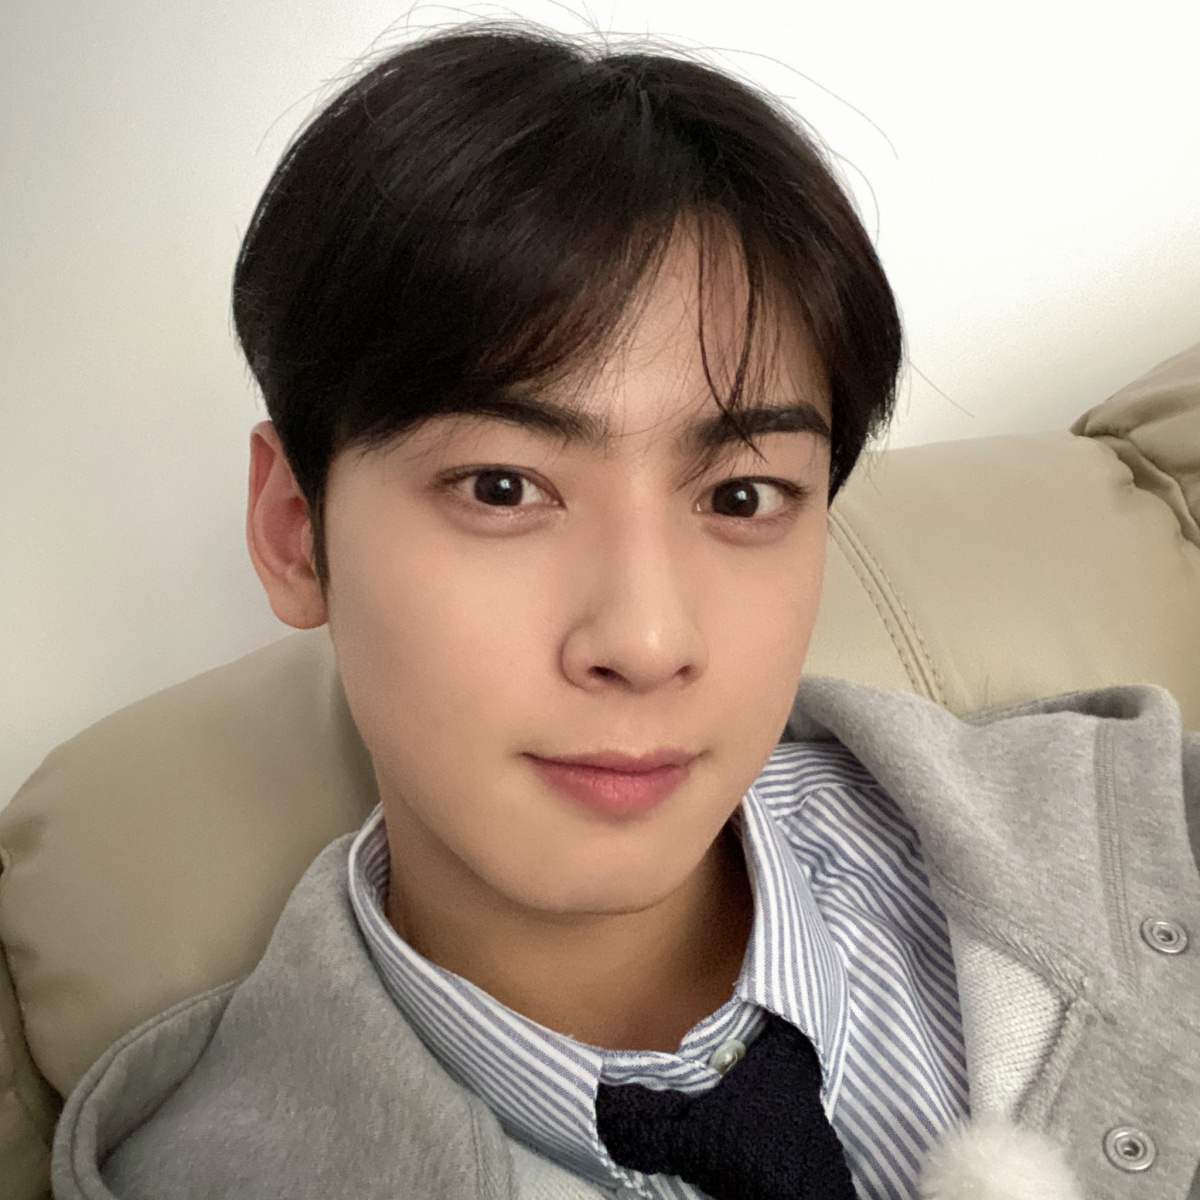 ASTRO's Cha Eunwoo Proves Yet Again Why He's Called A Face Genius